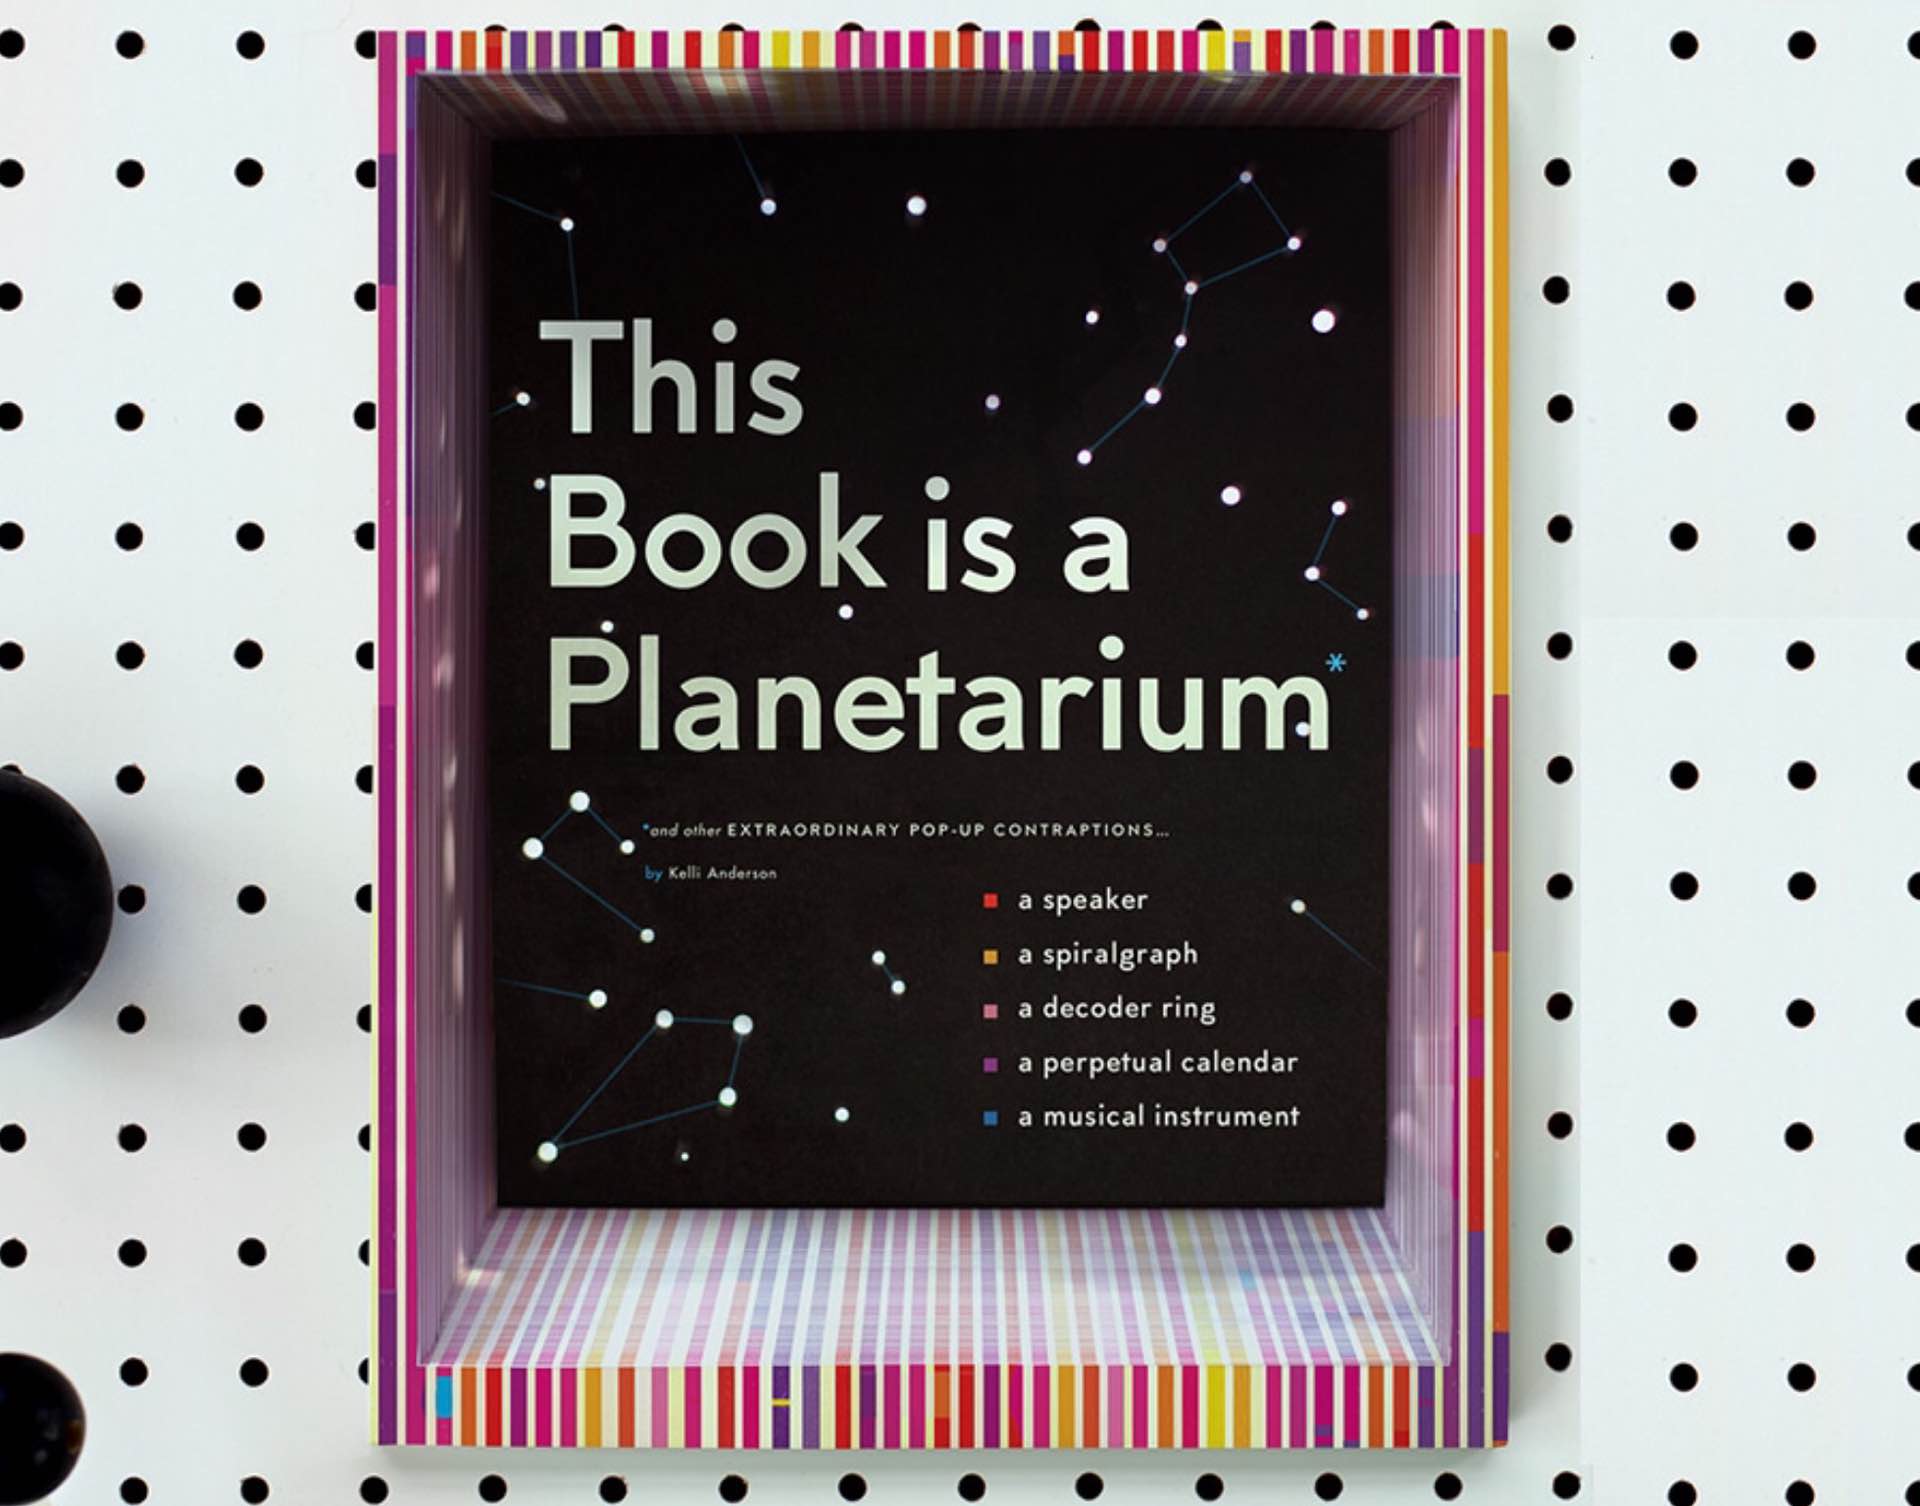 This Book is a Planetarium by Kelli Anderson ($26 pre-order; releases October 3rd, 2017)